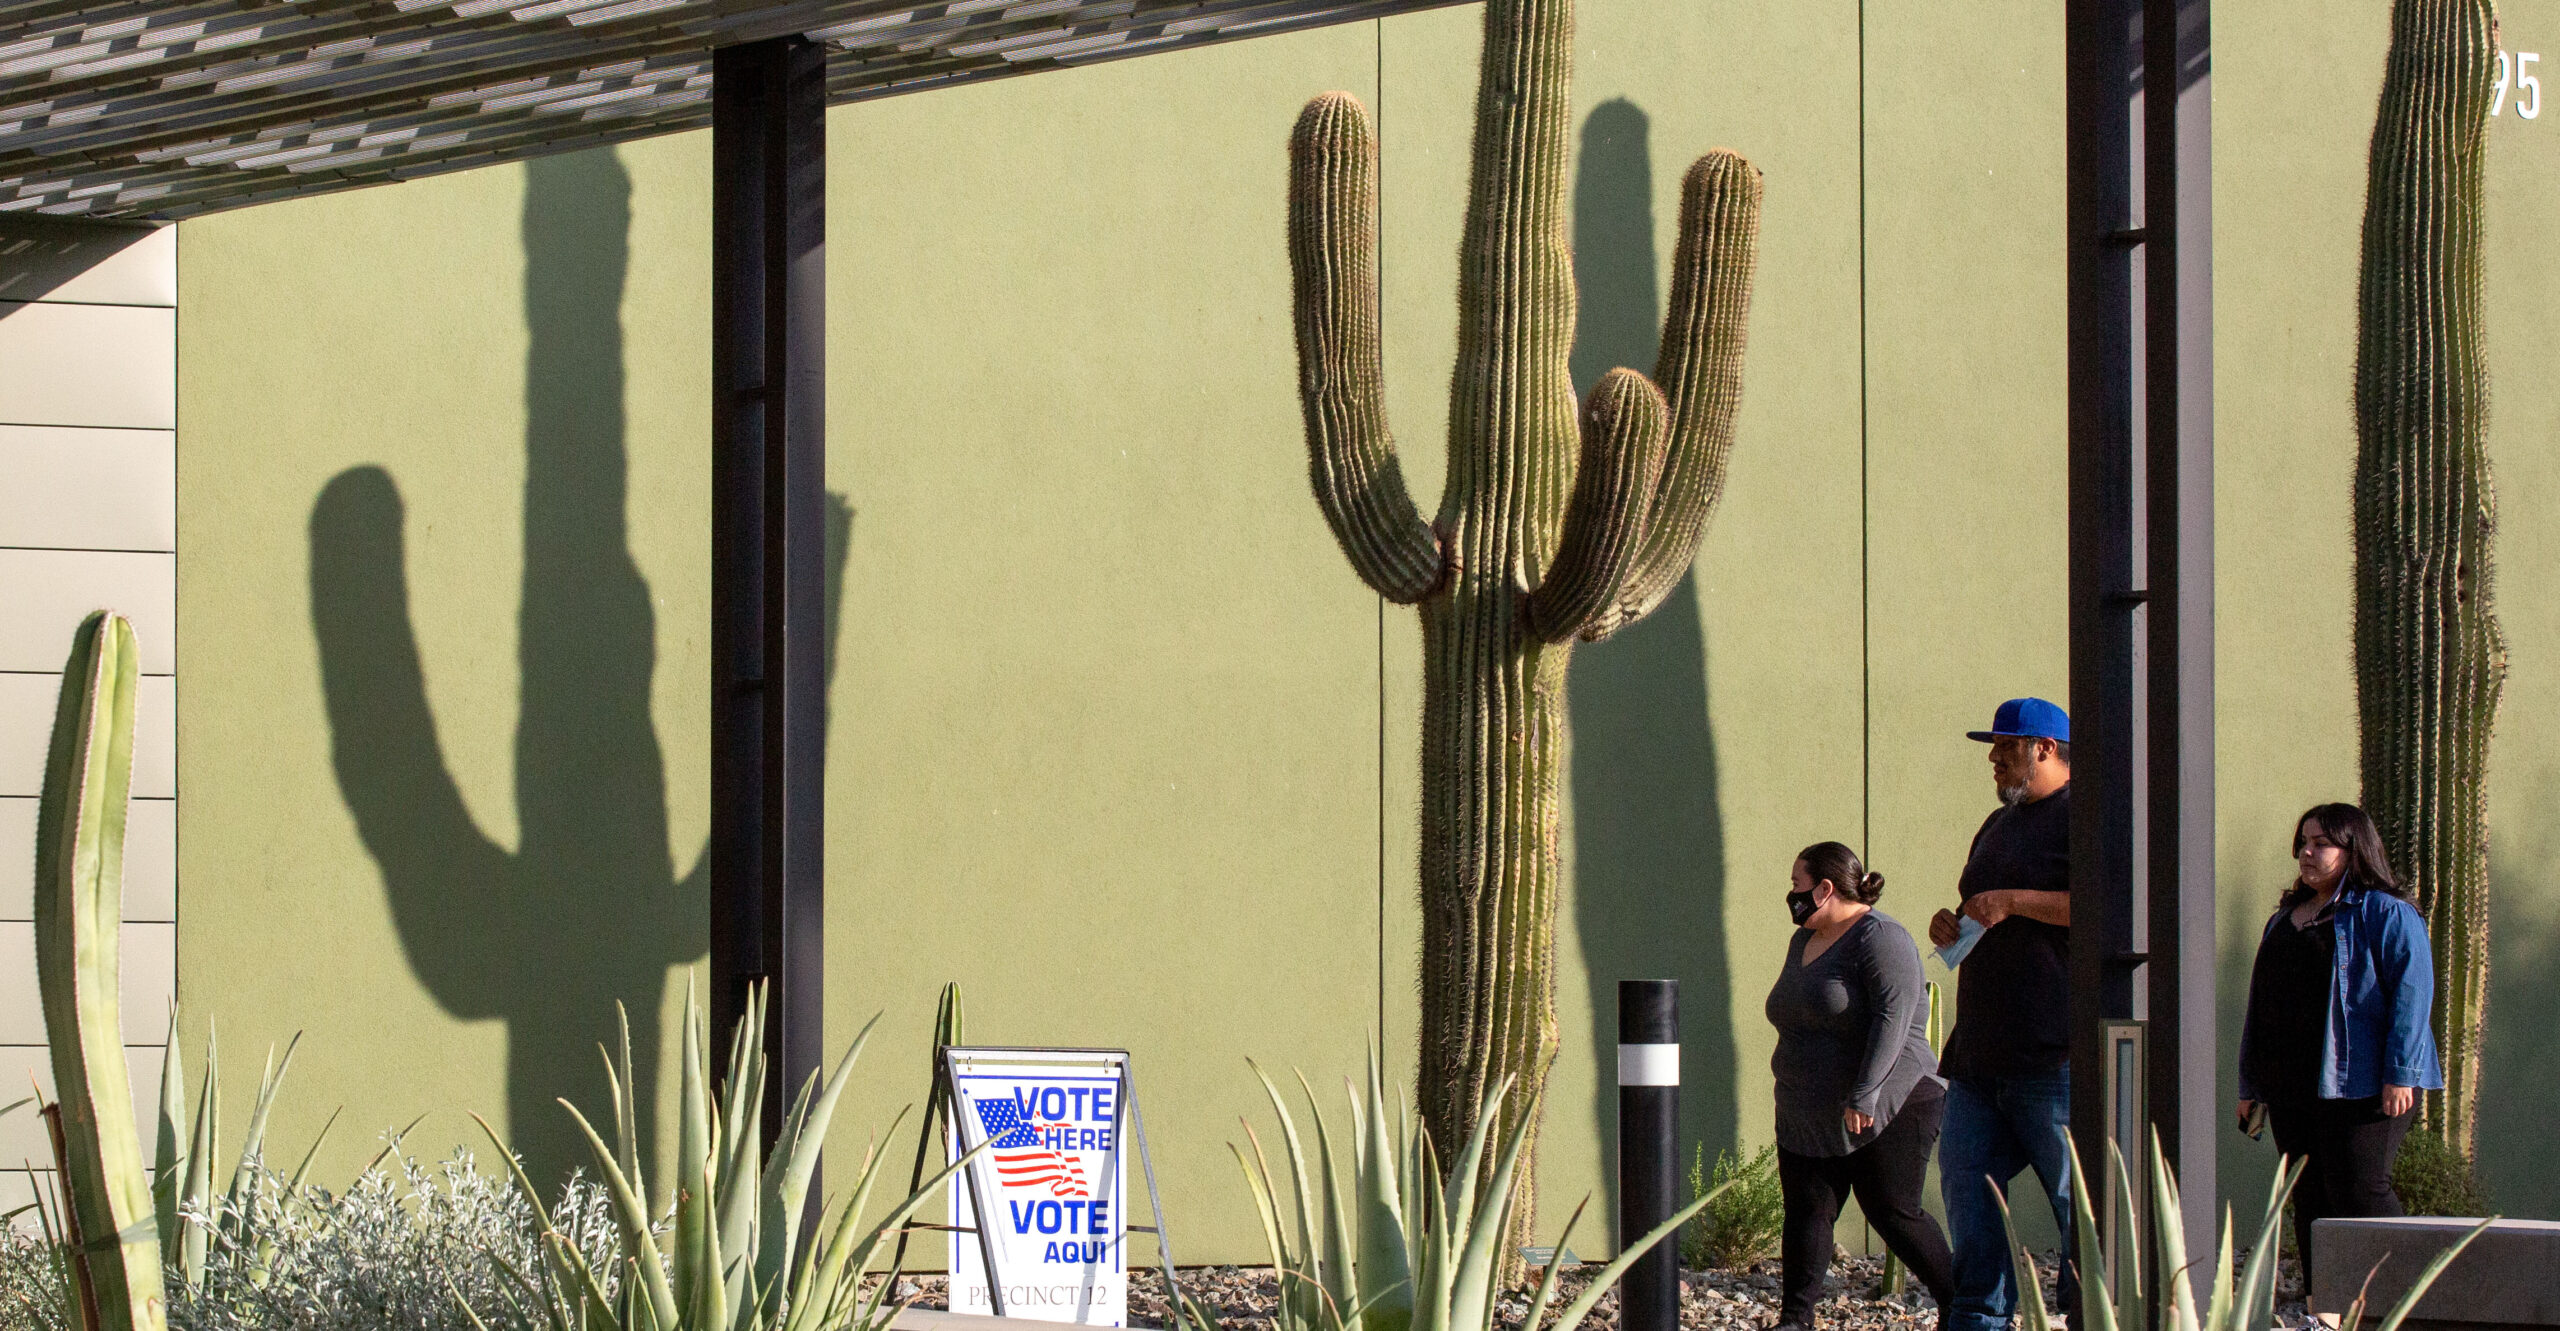 Justice Department Won't Oppose Arizona Election Reform Before Supreme Court Hears Case